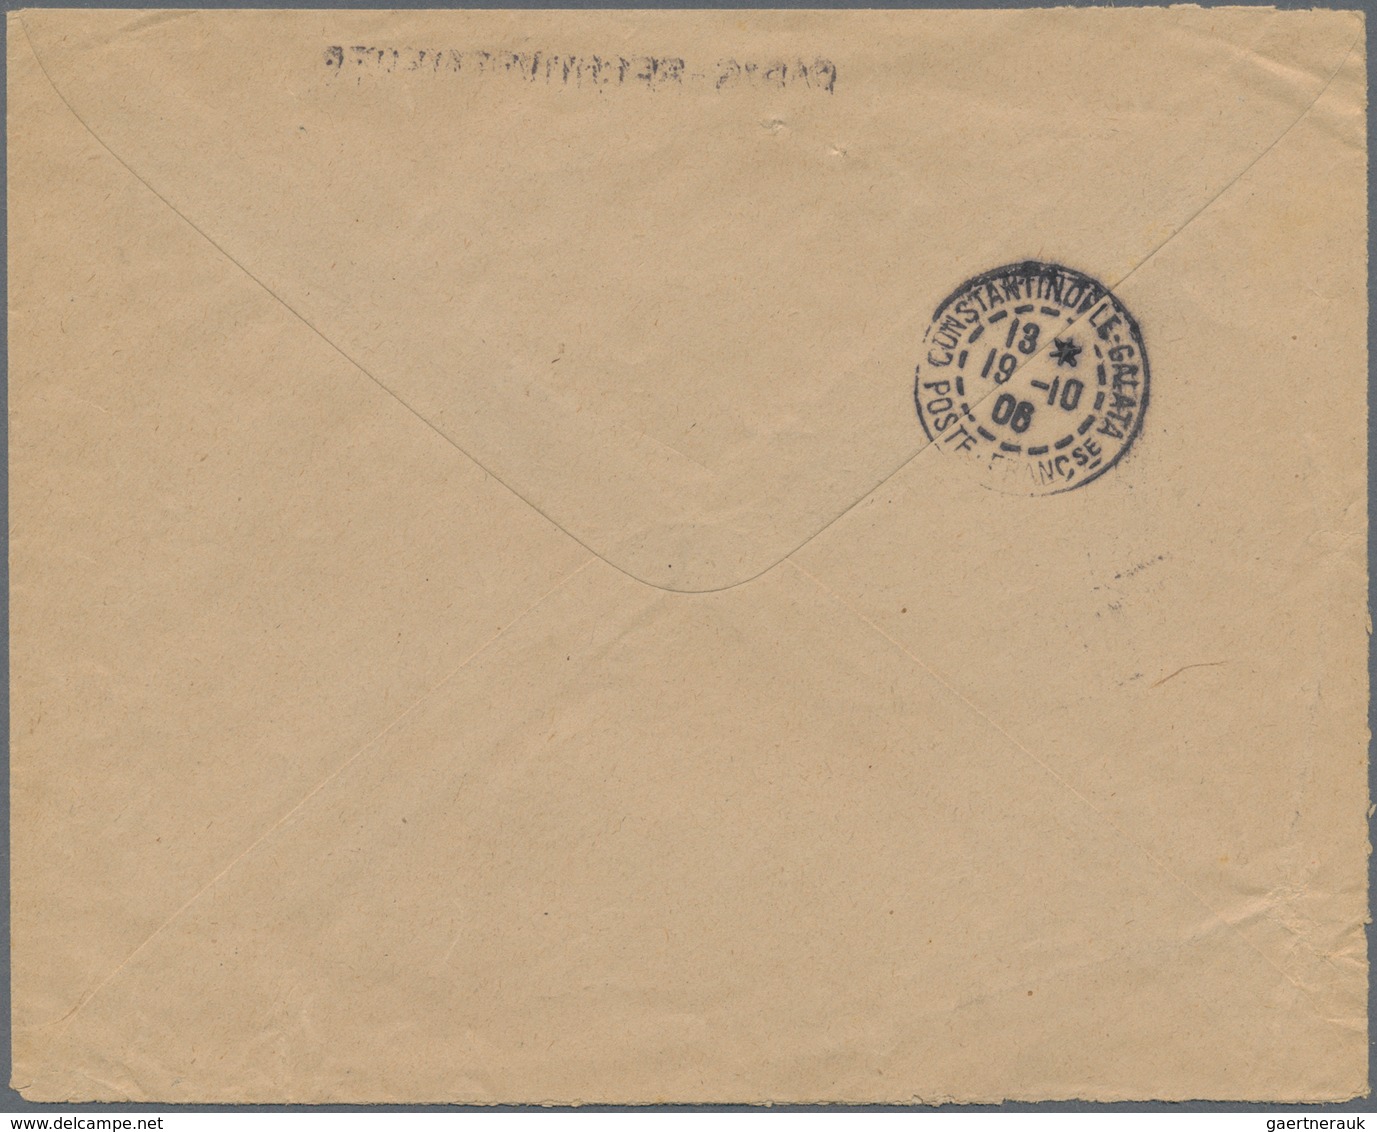 Frankreich - Portomarken: 1906, Post Official Pre-print Cover From Paris To Constantinopel, There Wr - 1960-.... Brieven & Documenten